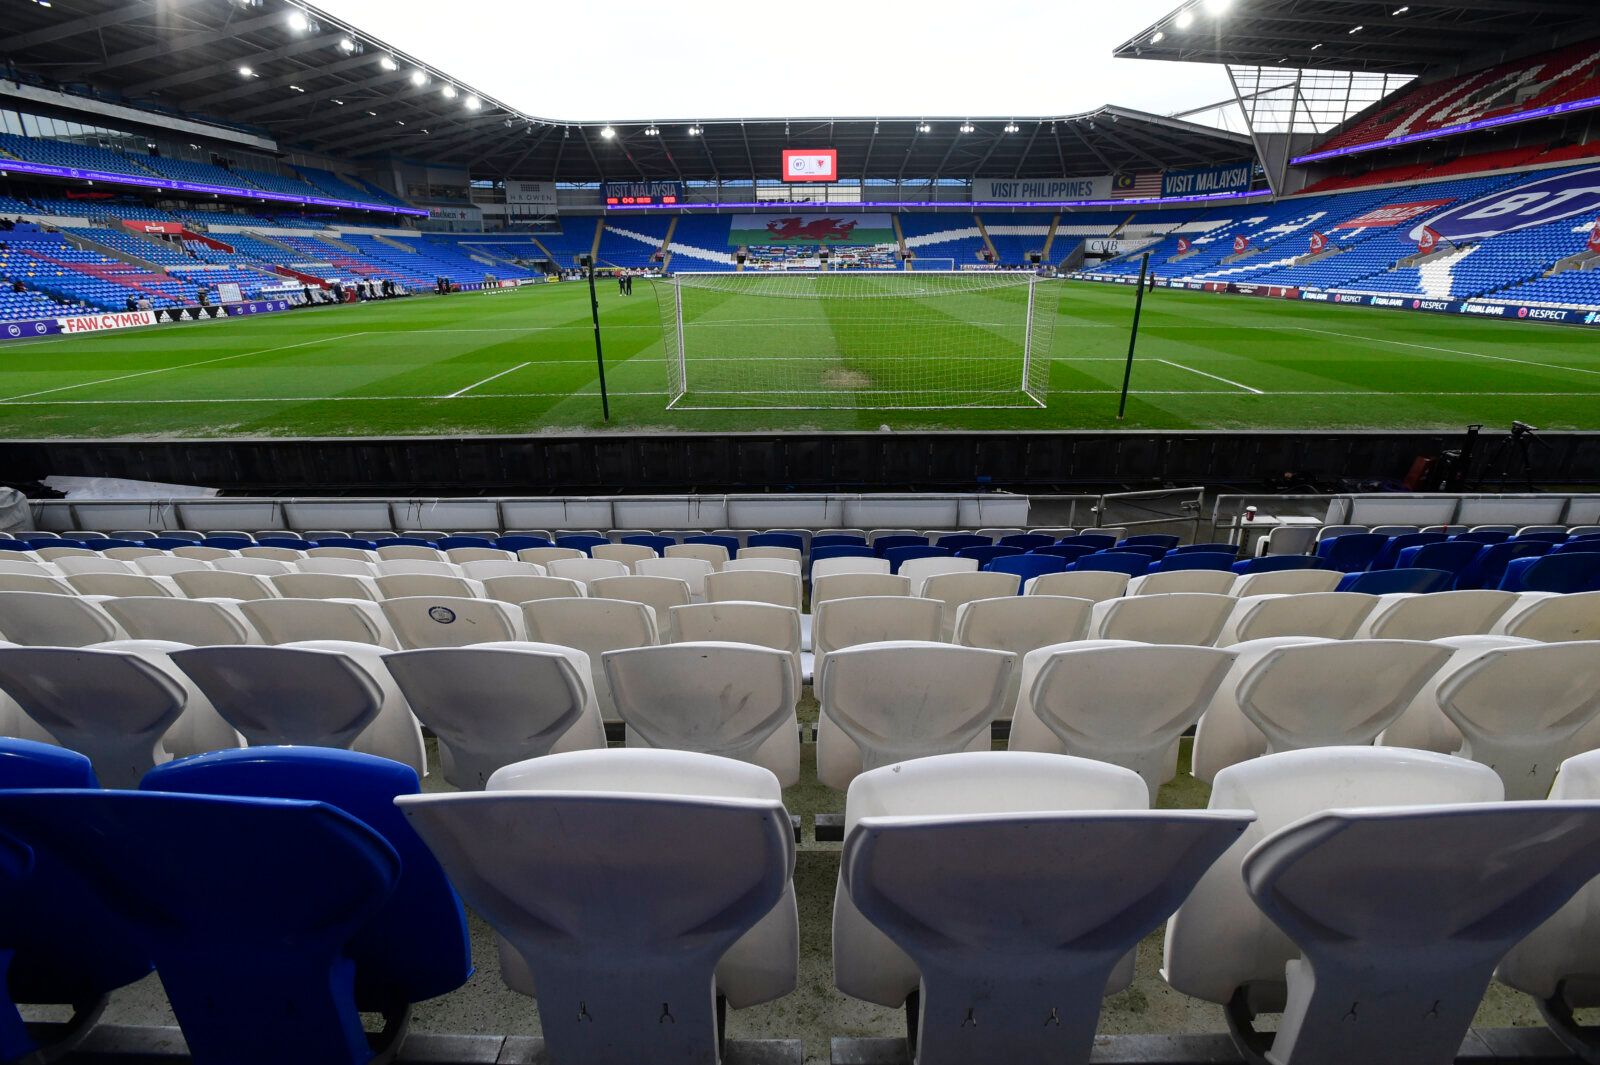 Soccer Football - World Cup Qualifiers Europe - Group E - Wales v Czech Republic - Cardiff City Stadium, Cardiff, Wales, Britain - March 30, 2021 General view inside the stadium before the match REUTERS/Rebecca Naden